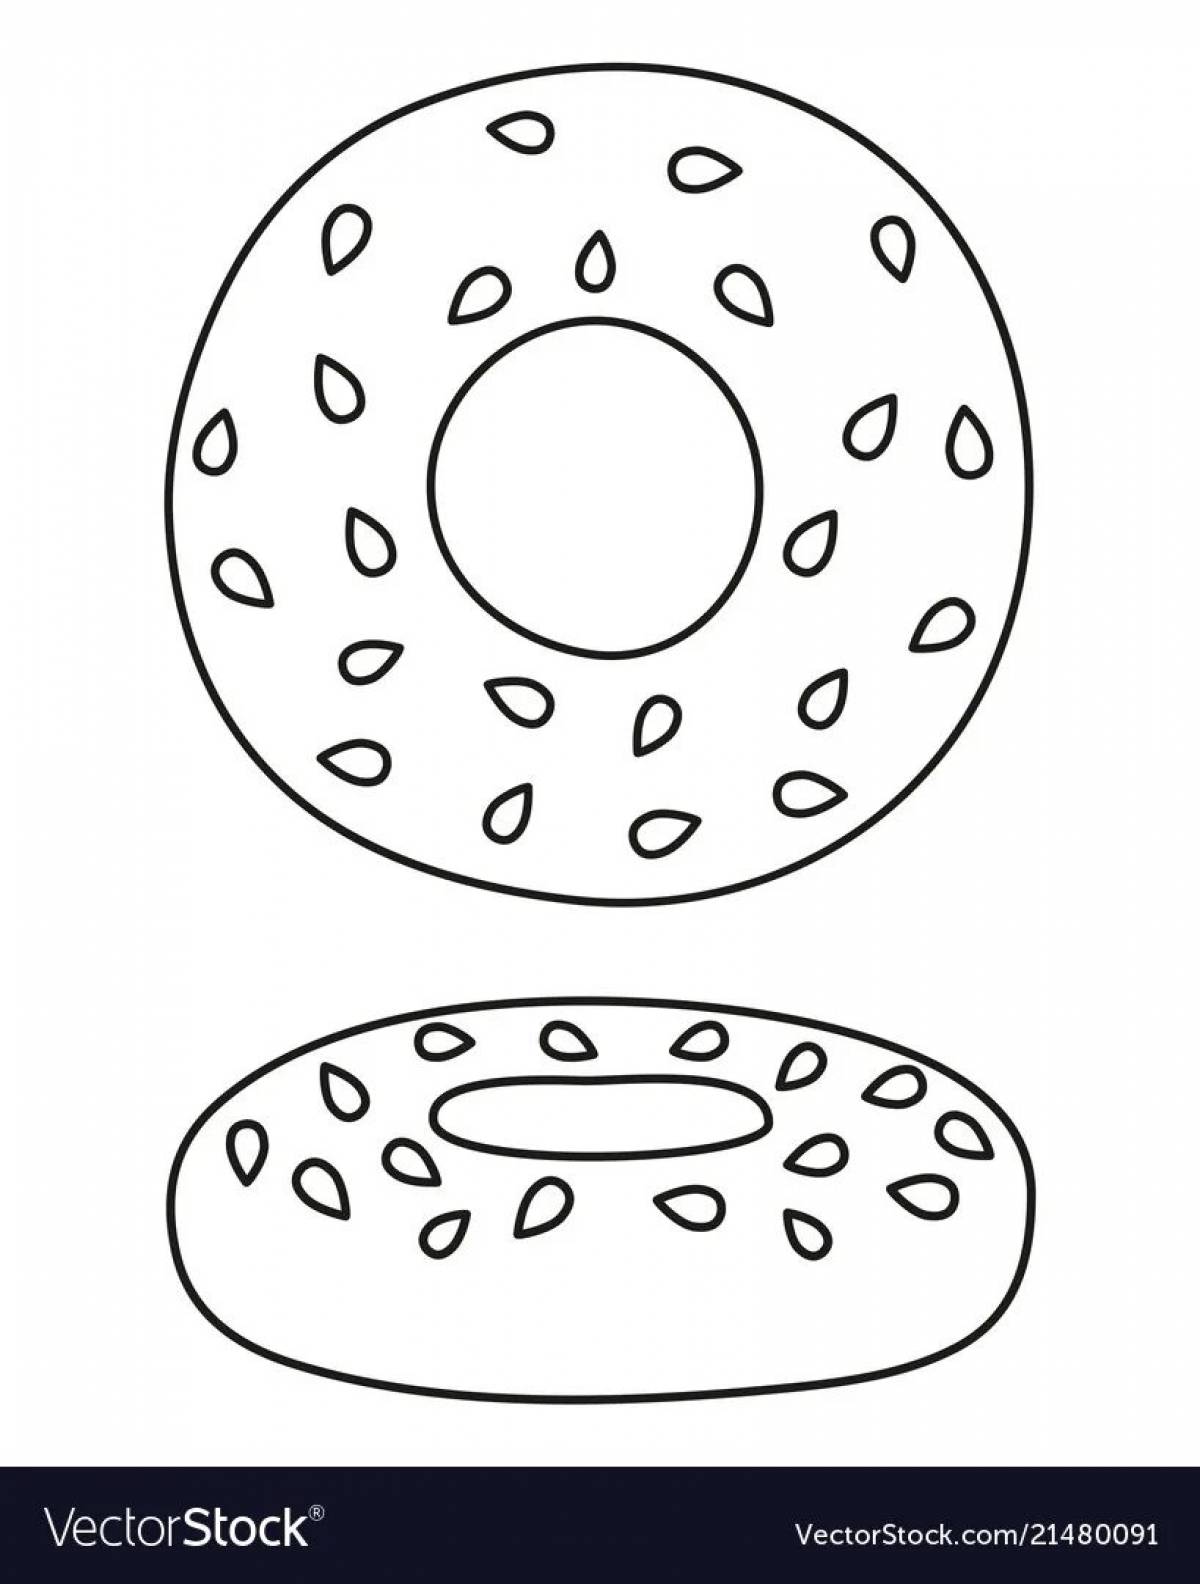 Cute donut bagel coloring page